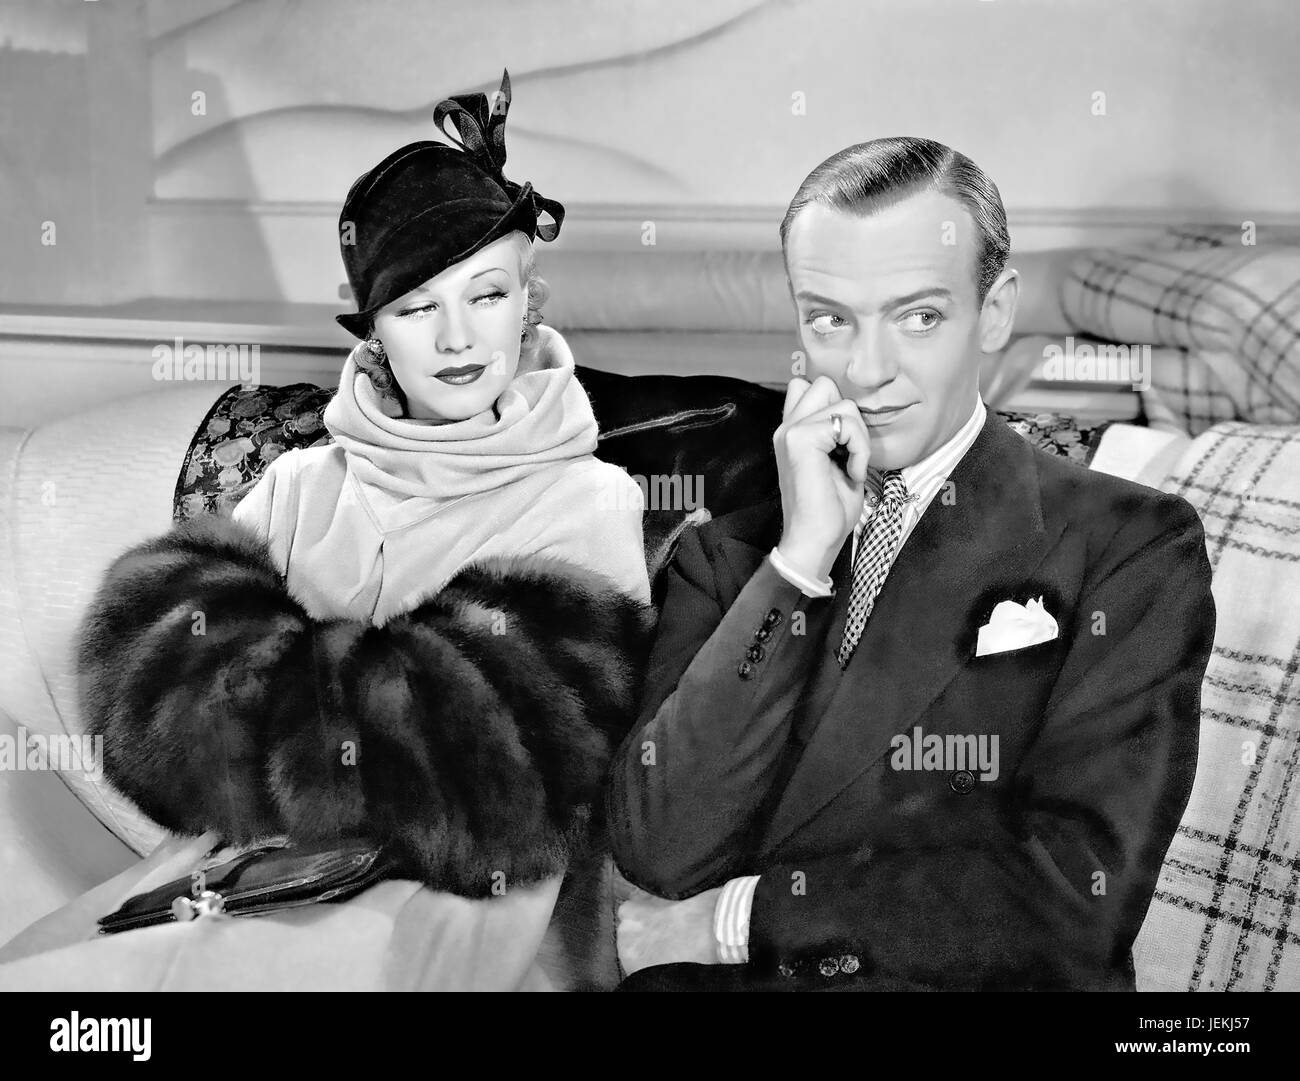 ROBERTA 1935 RKO Radio Pictures Film mit Fred Astaire und Ginger Rogers Stockfoto